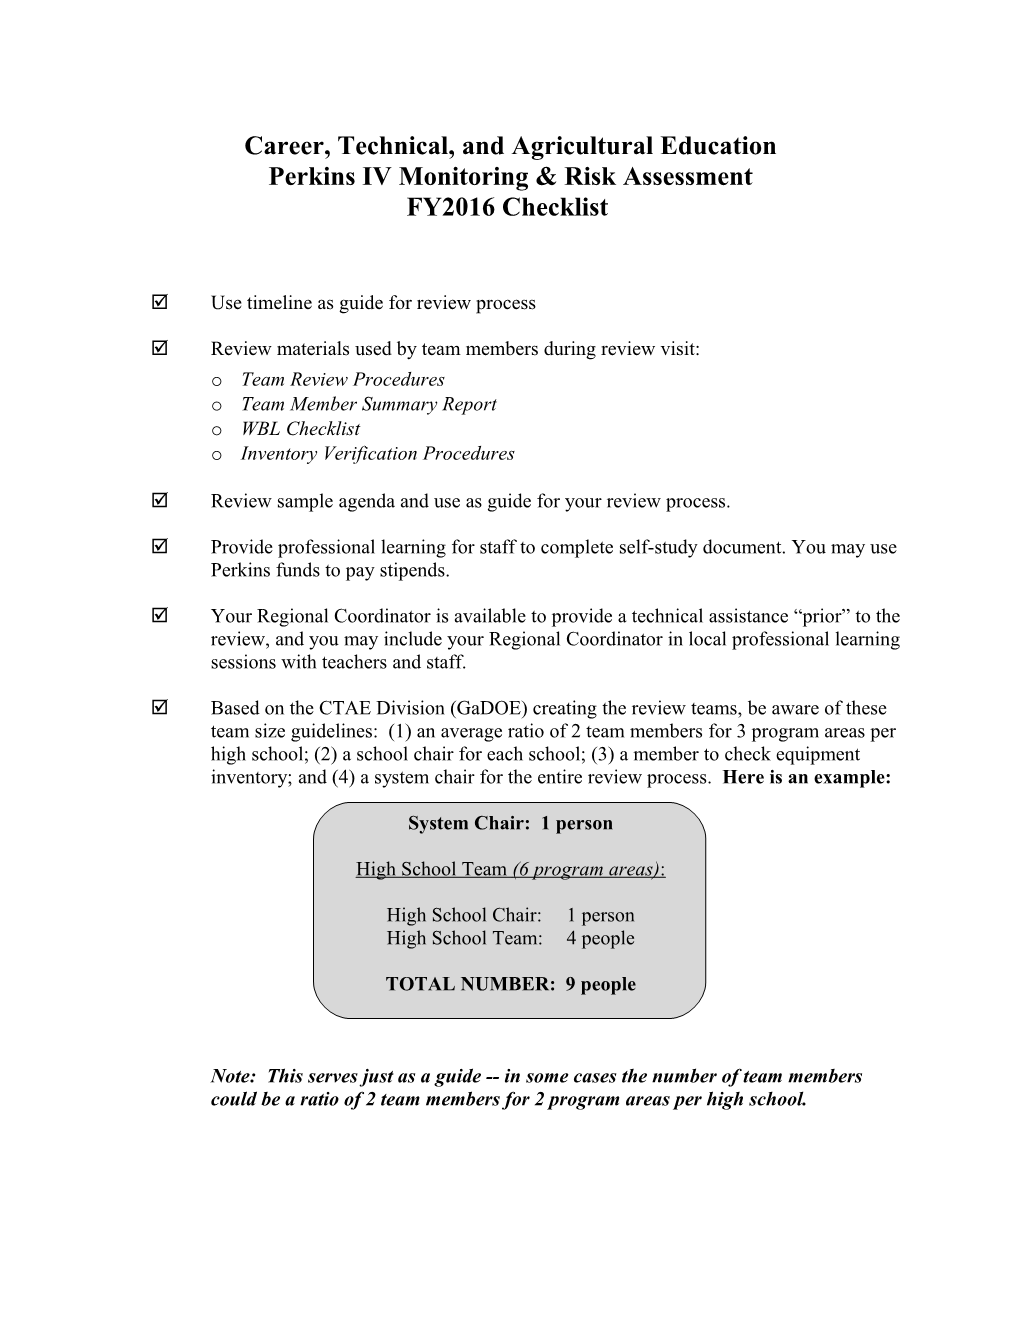 Career, Technical, and Agricultural Education Program Review Checklist